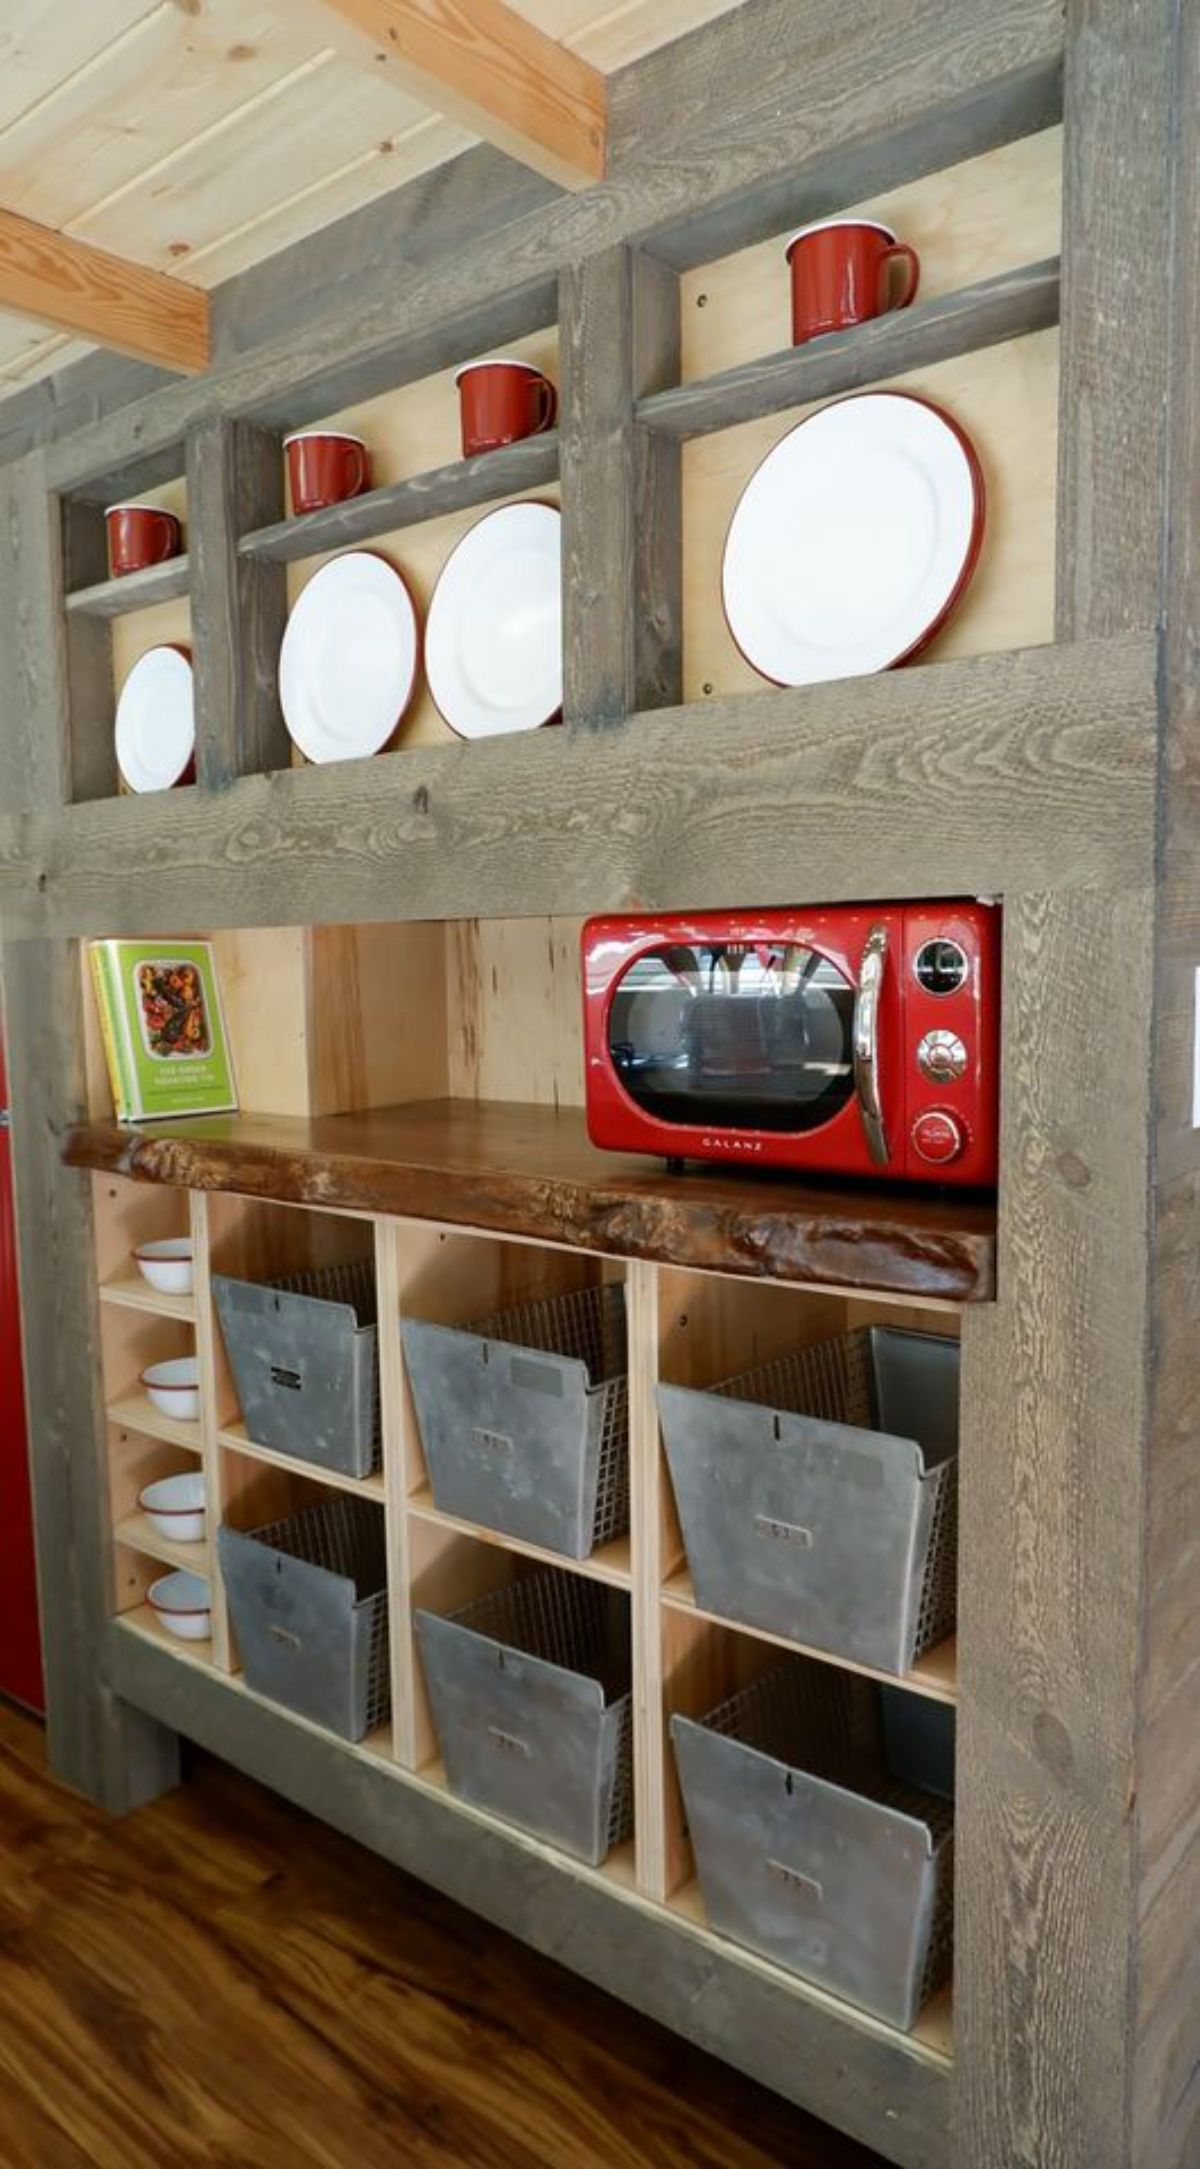 wood wall of cubbies with gray baskets and red microwave on middle open shelf